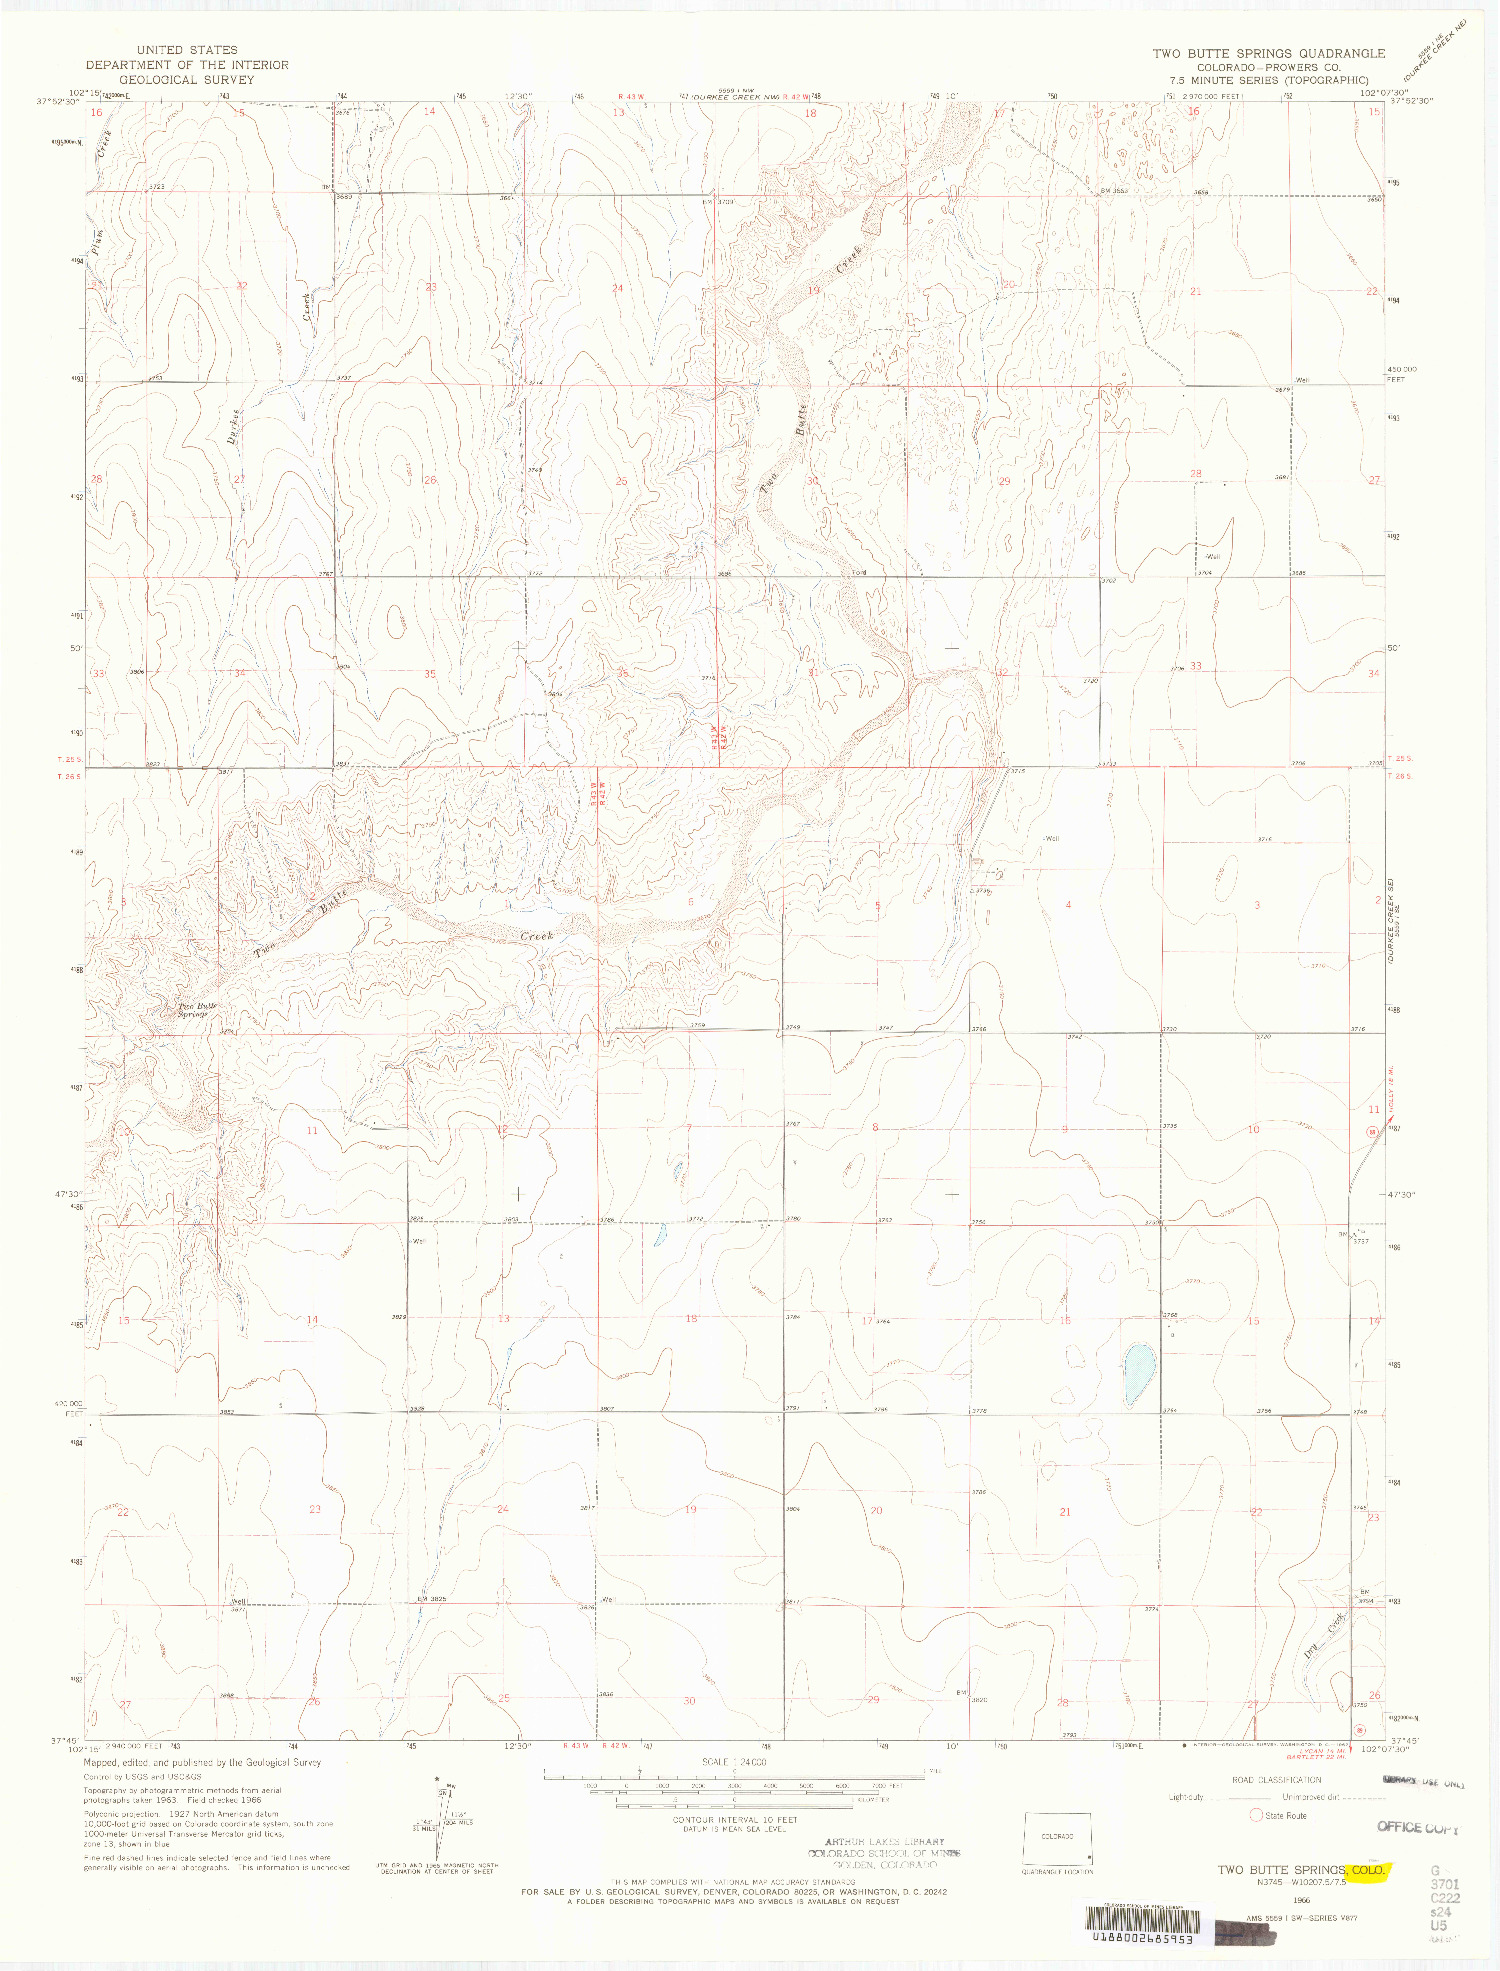 USGS 1:24000-SCALE QUADRANGLE FOR TWO BUTTE SPRINGS, CO 1966